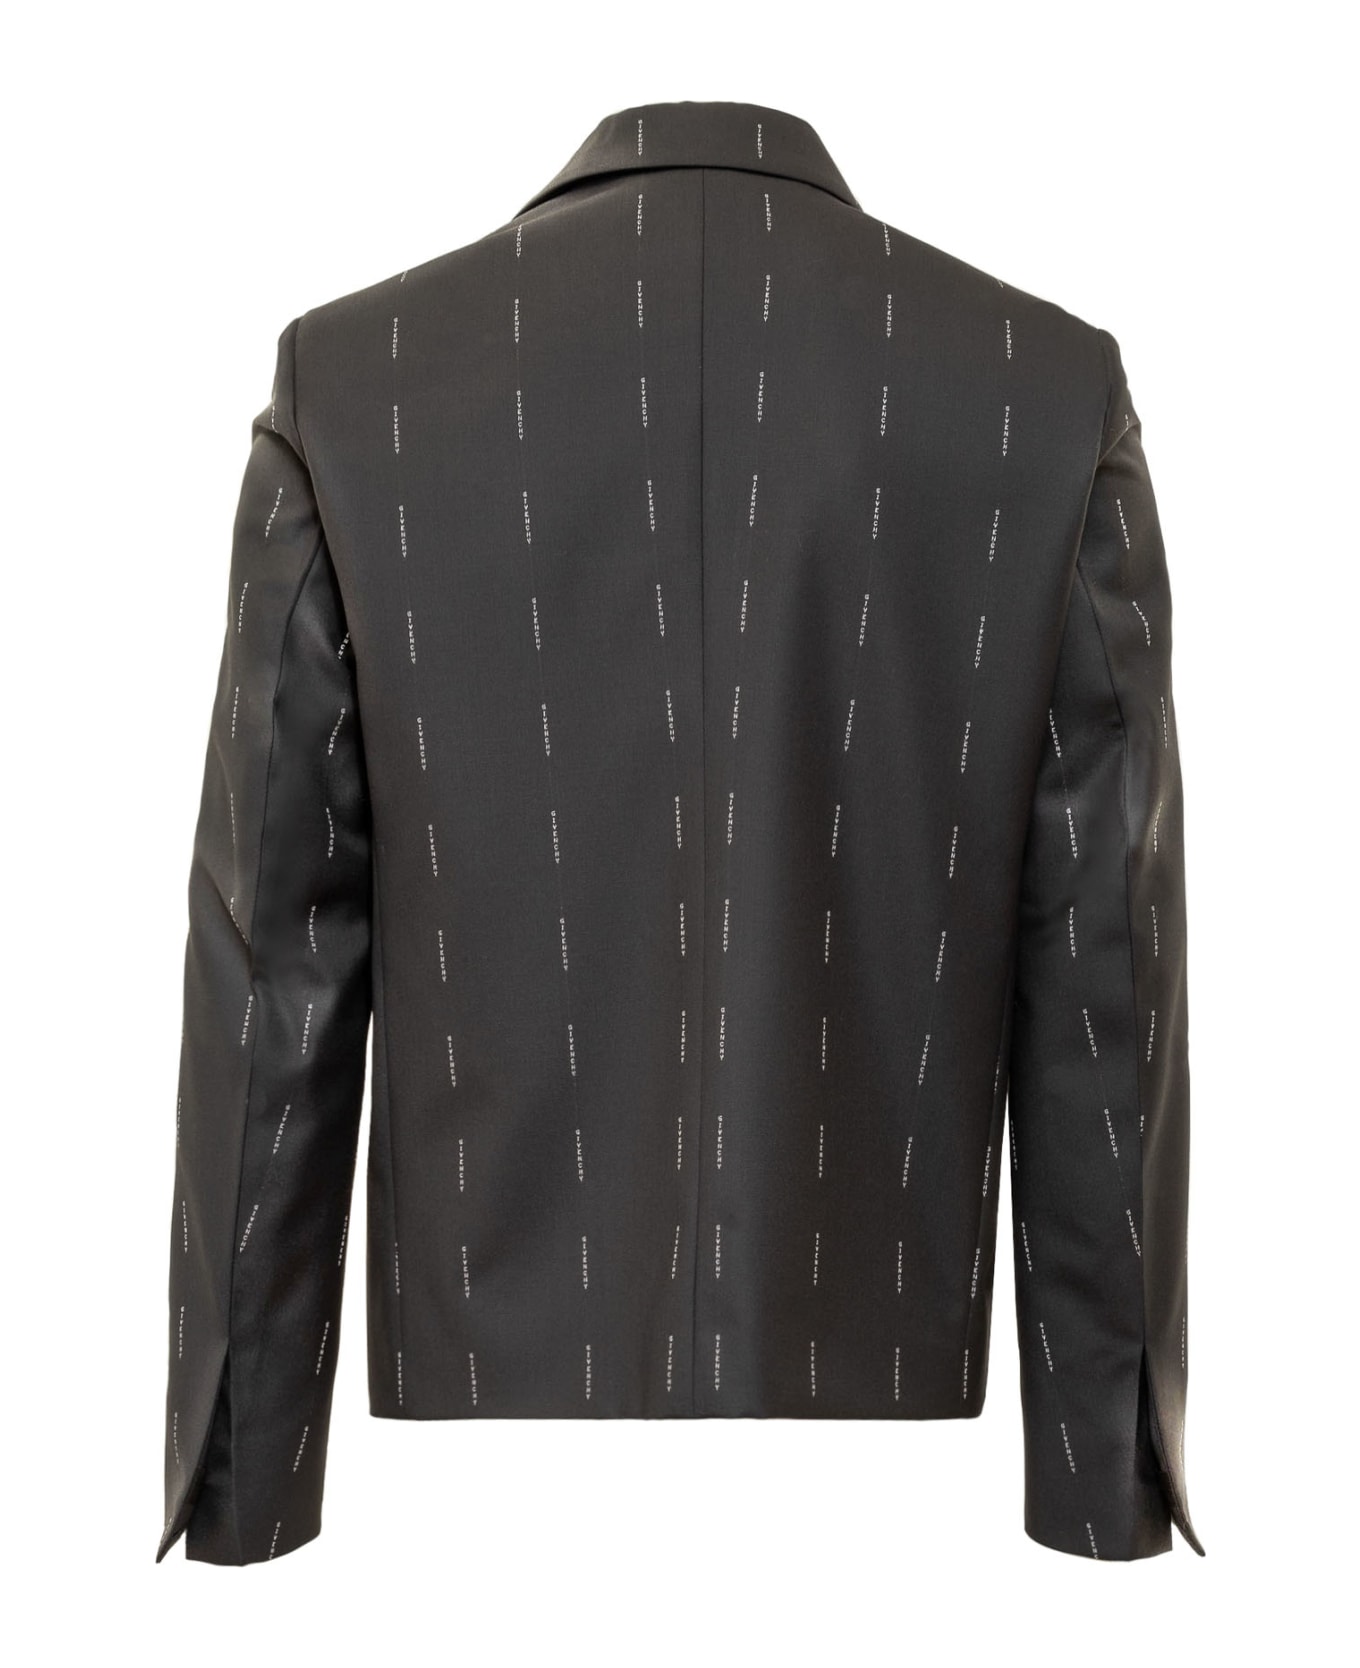 Givenchy Embroidered Twill Blazer - black